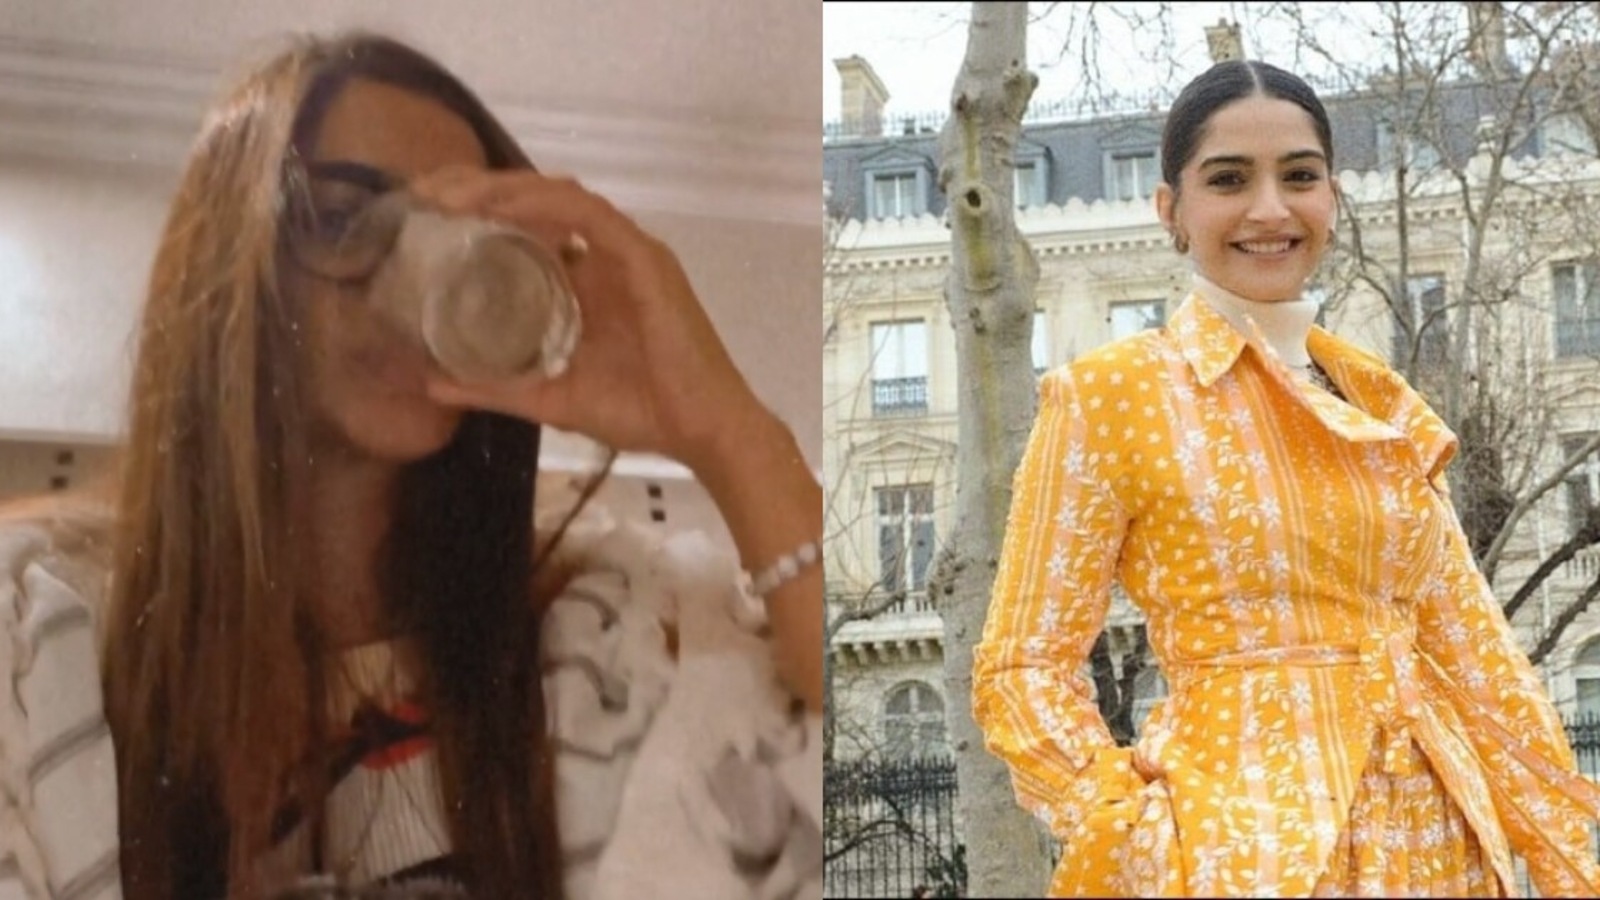 Sonam Kapoor Nangi Photo Xx Video - Sonam Kapoor puts an end to pregnancy rumours with cheeky post: 'Ginger tea  for first day of my period' | Bollywood - Hindustan Times